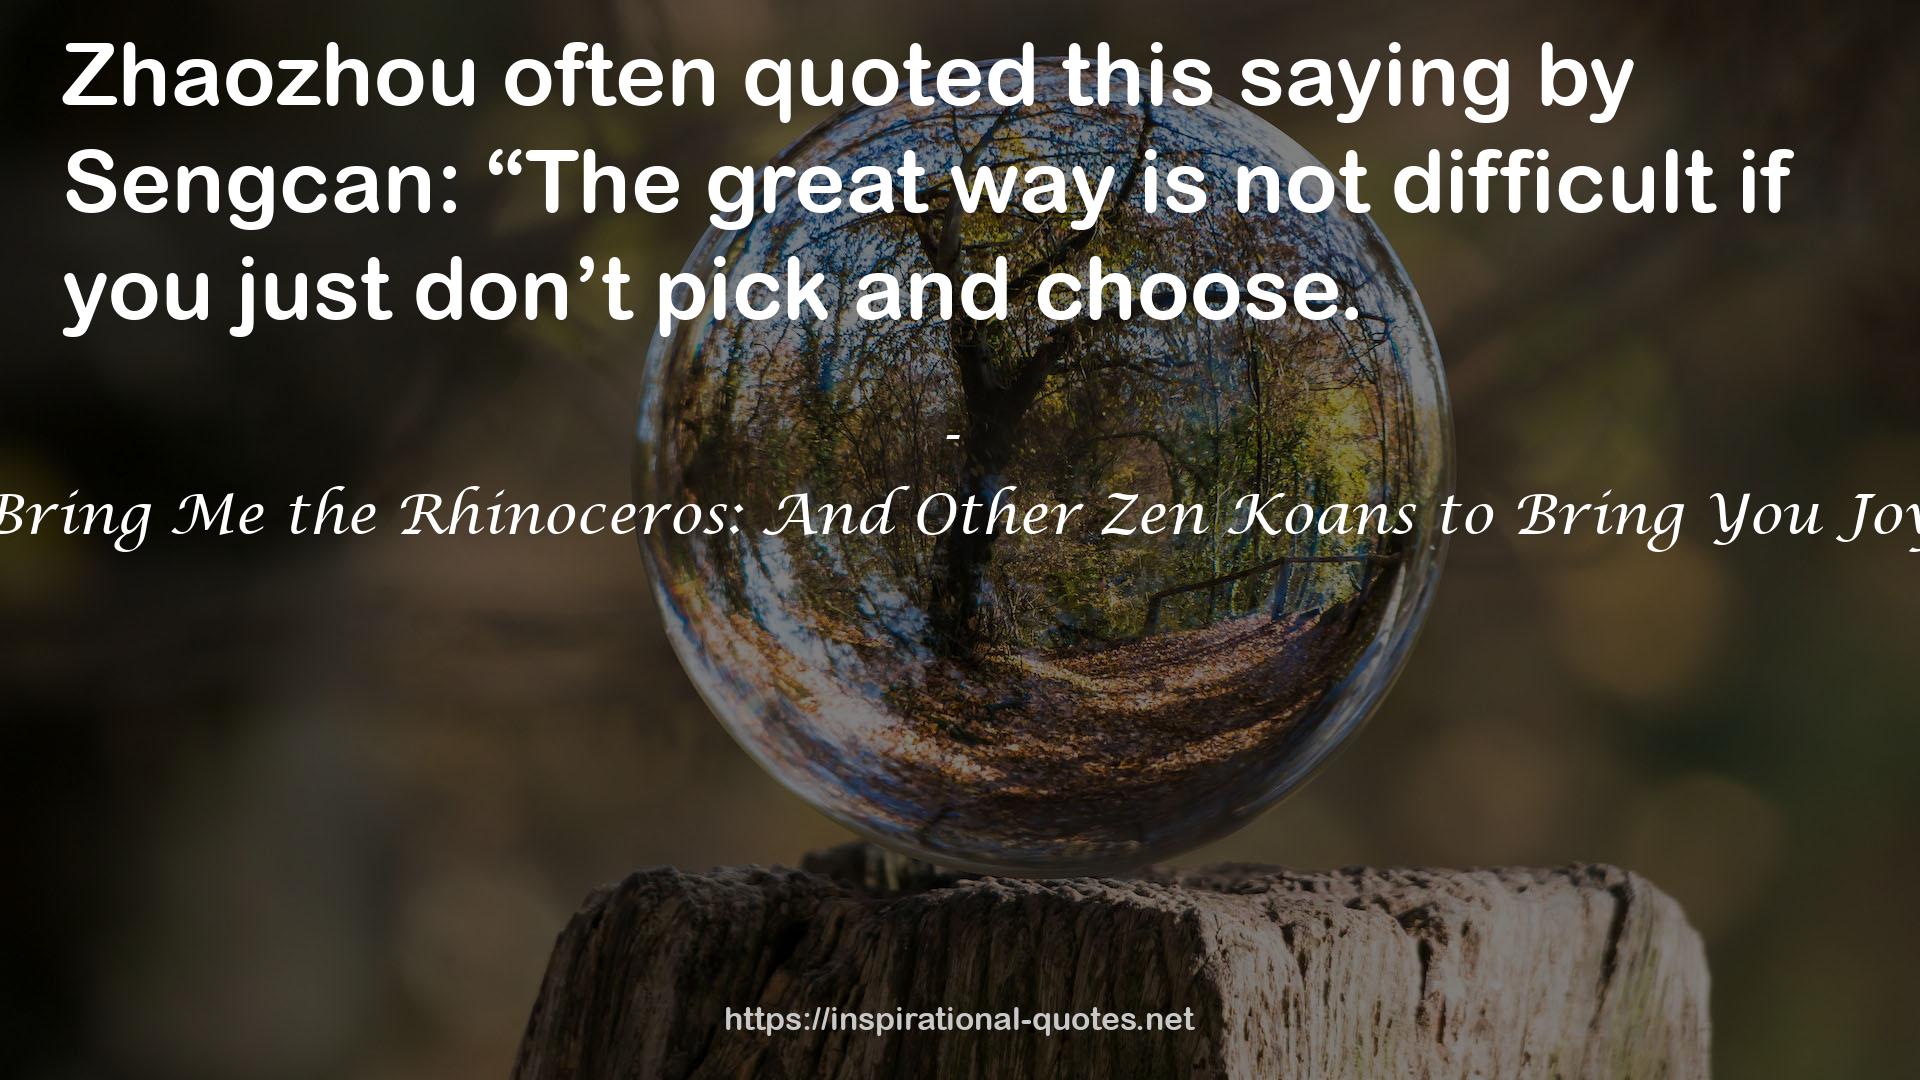 Bring Me the Rhinoceros: And Other Zen Koans to Bring You Joy QUOTES